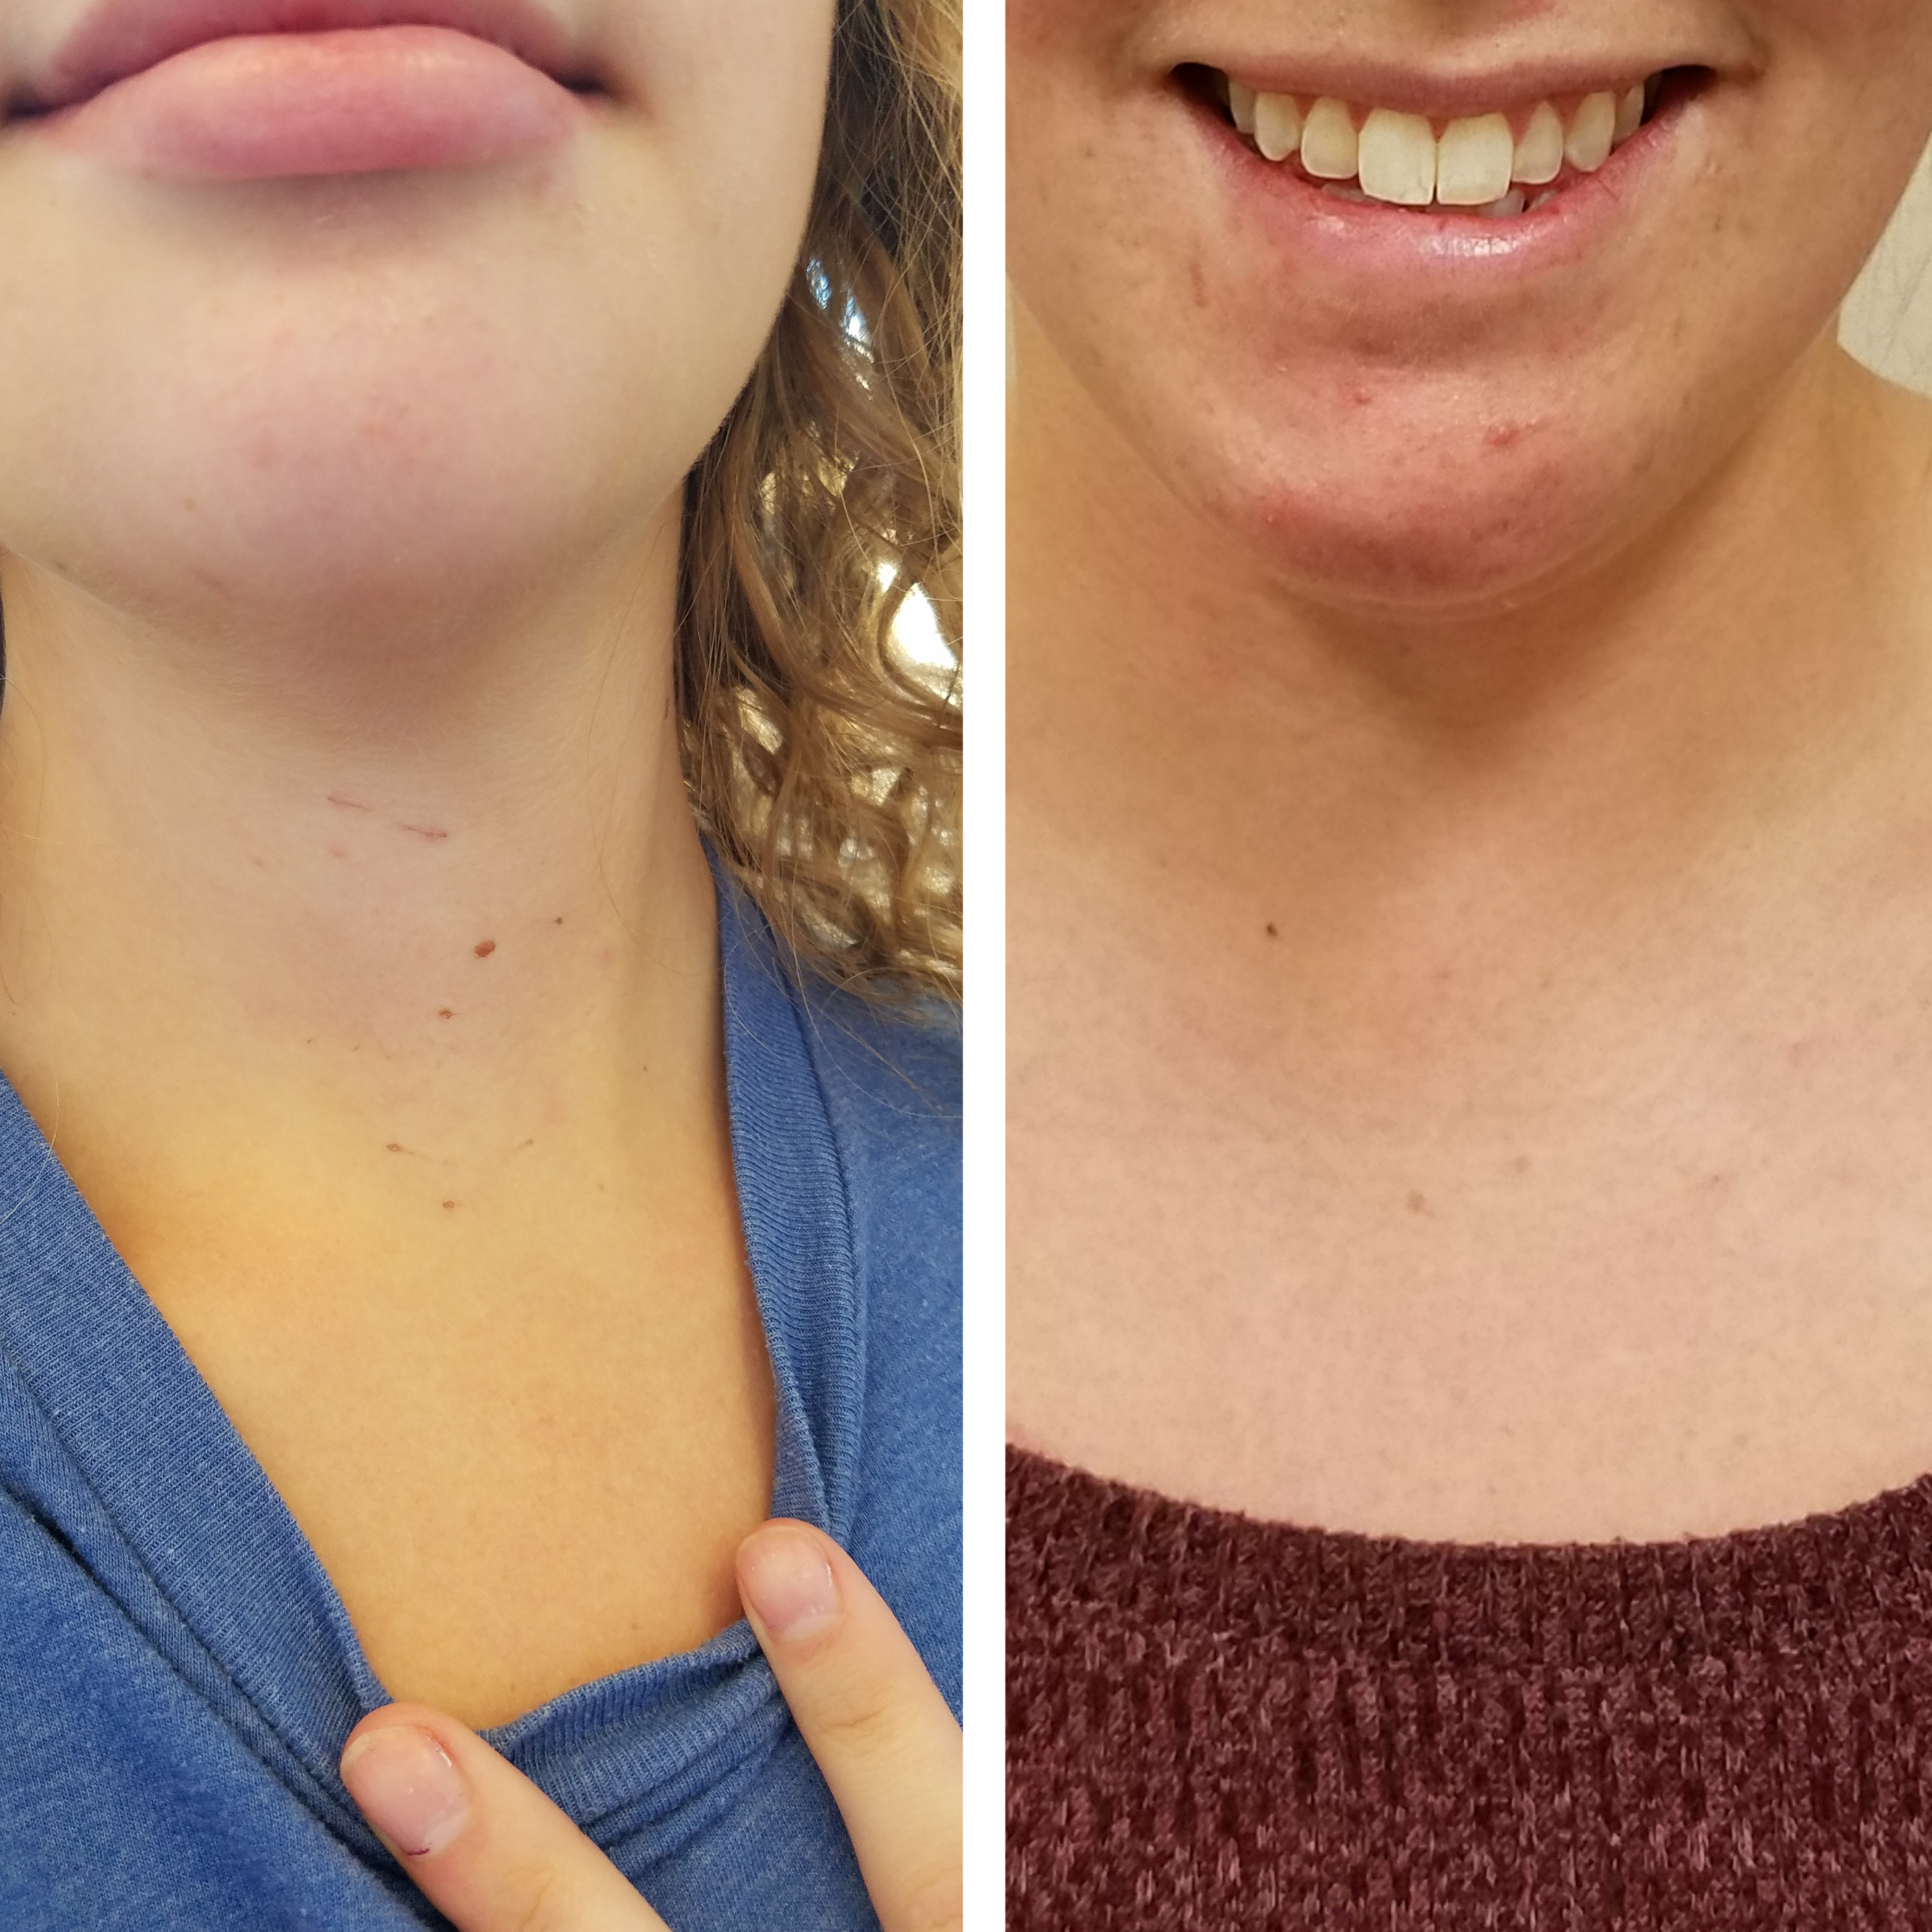 Two women show no scarring on their necks after thyroidectemy.